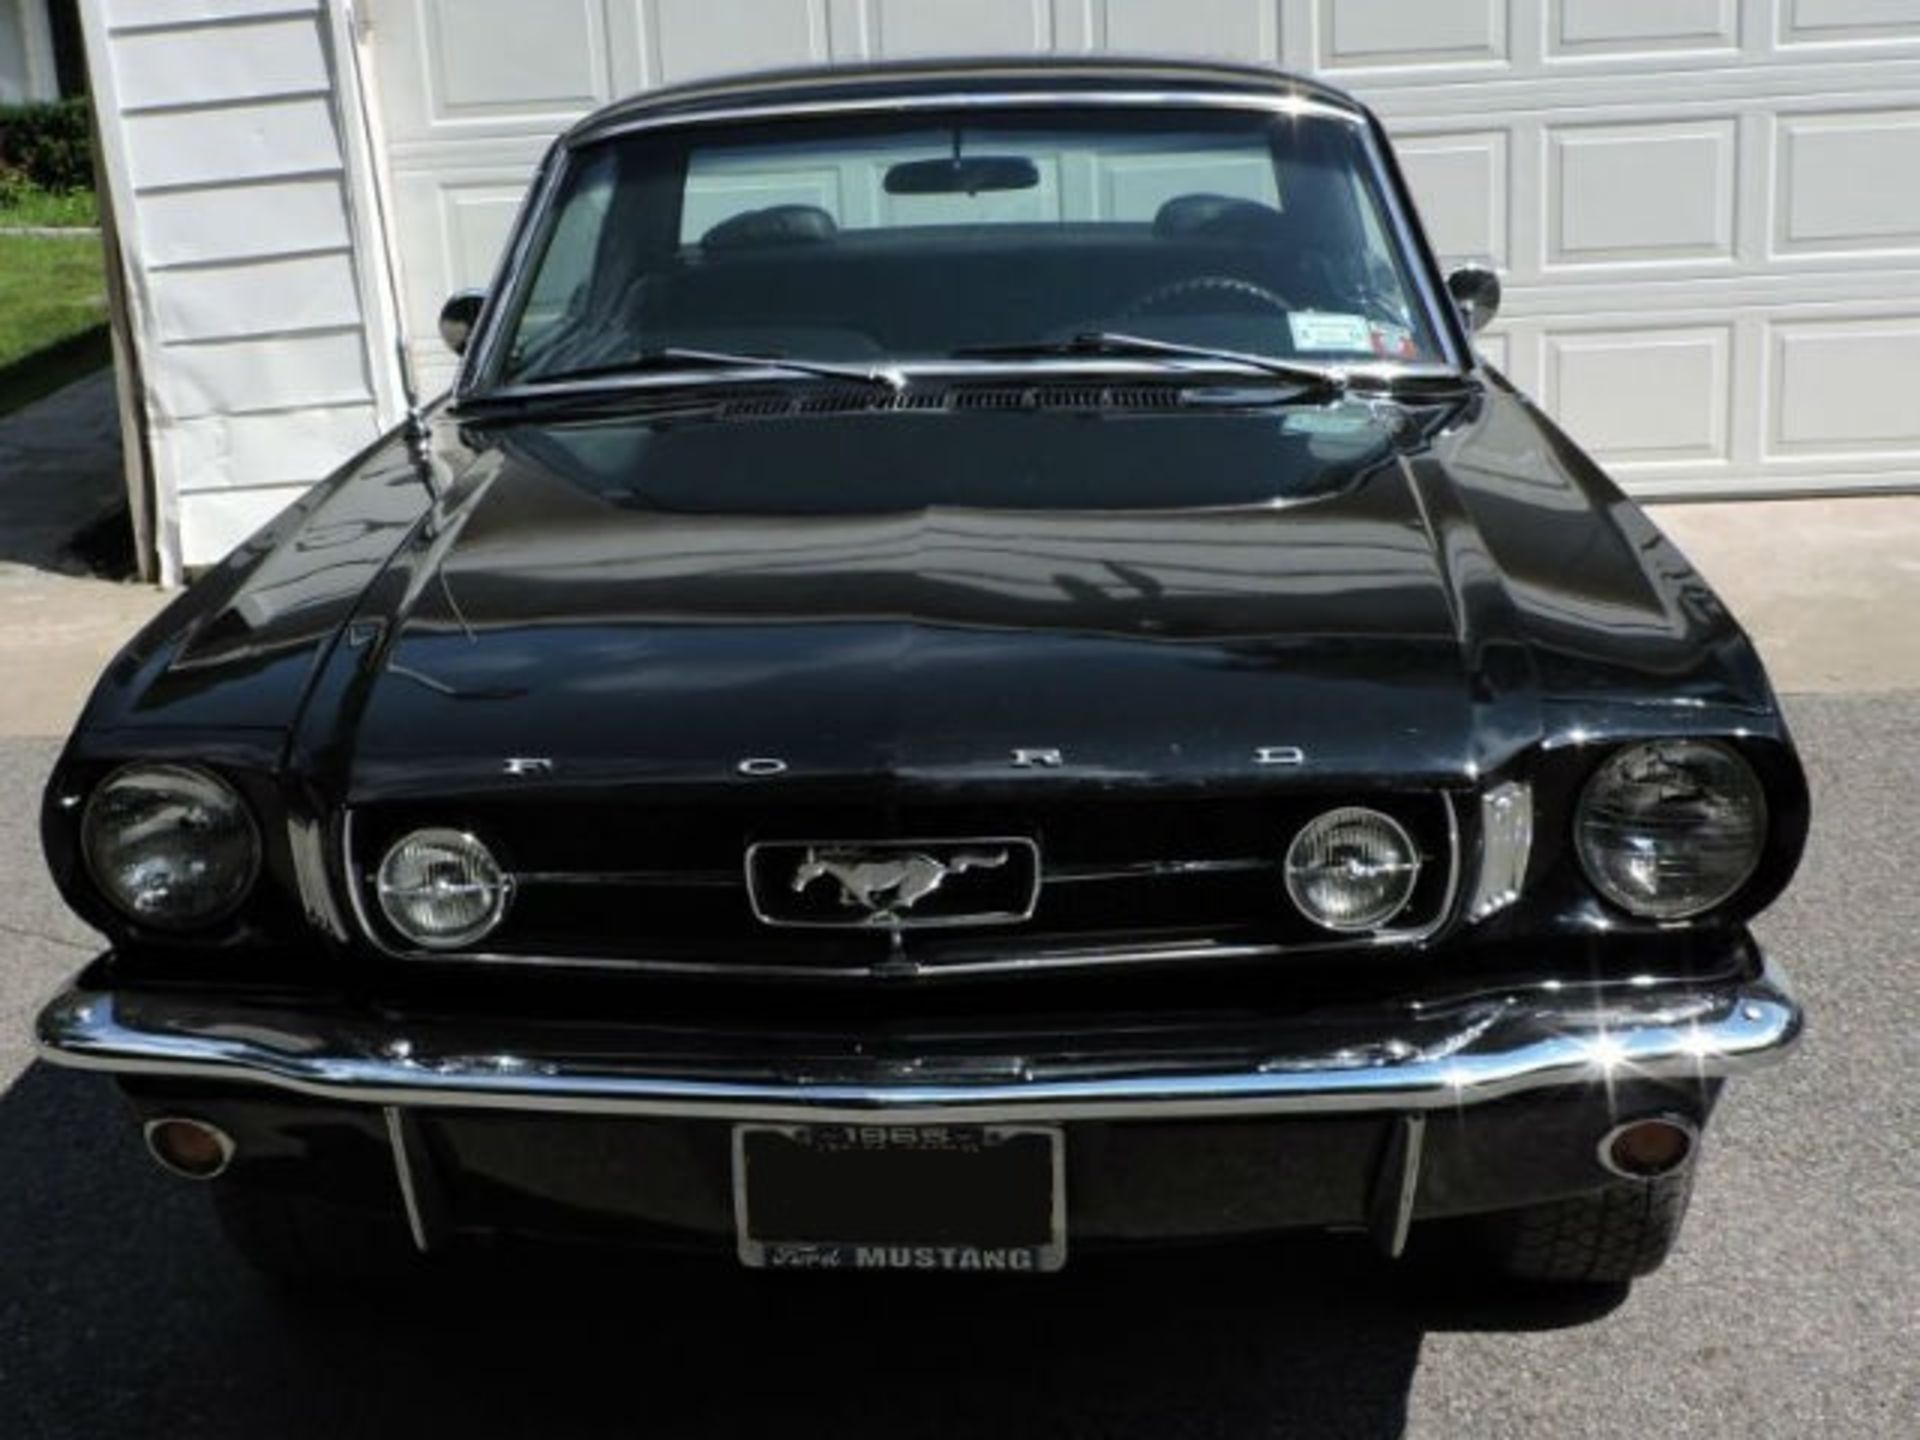 65' Ford Mustang - Year 1965, Automatic Transmission, Original Factory A/C, 6 Cylinders, Approx 72, - Image 2 of 8